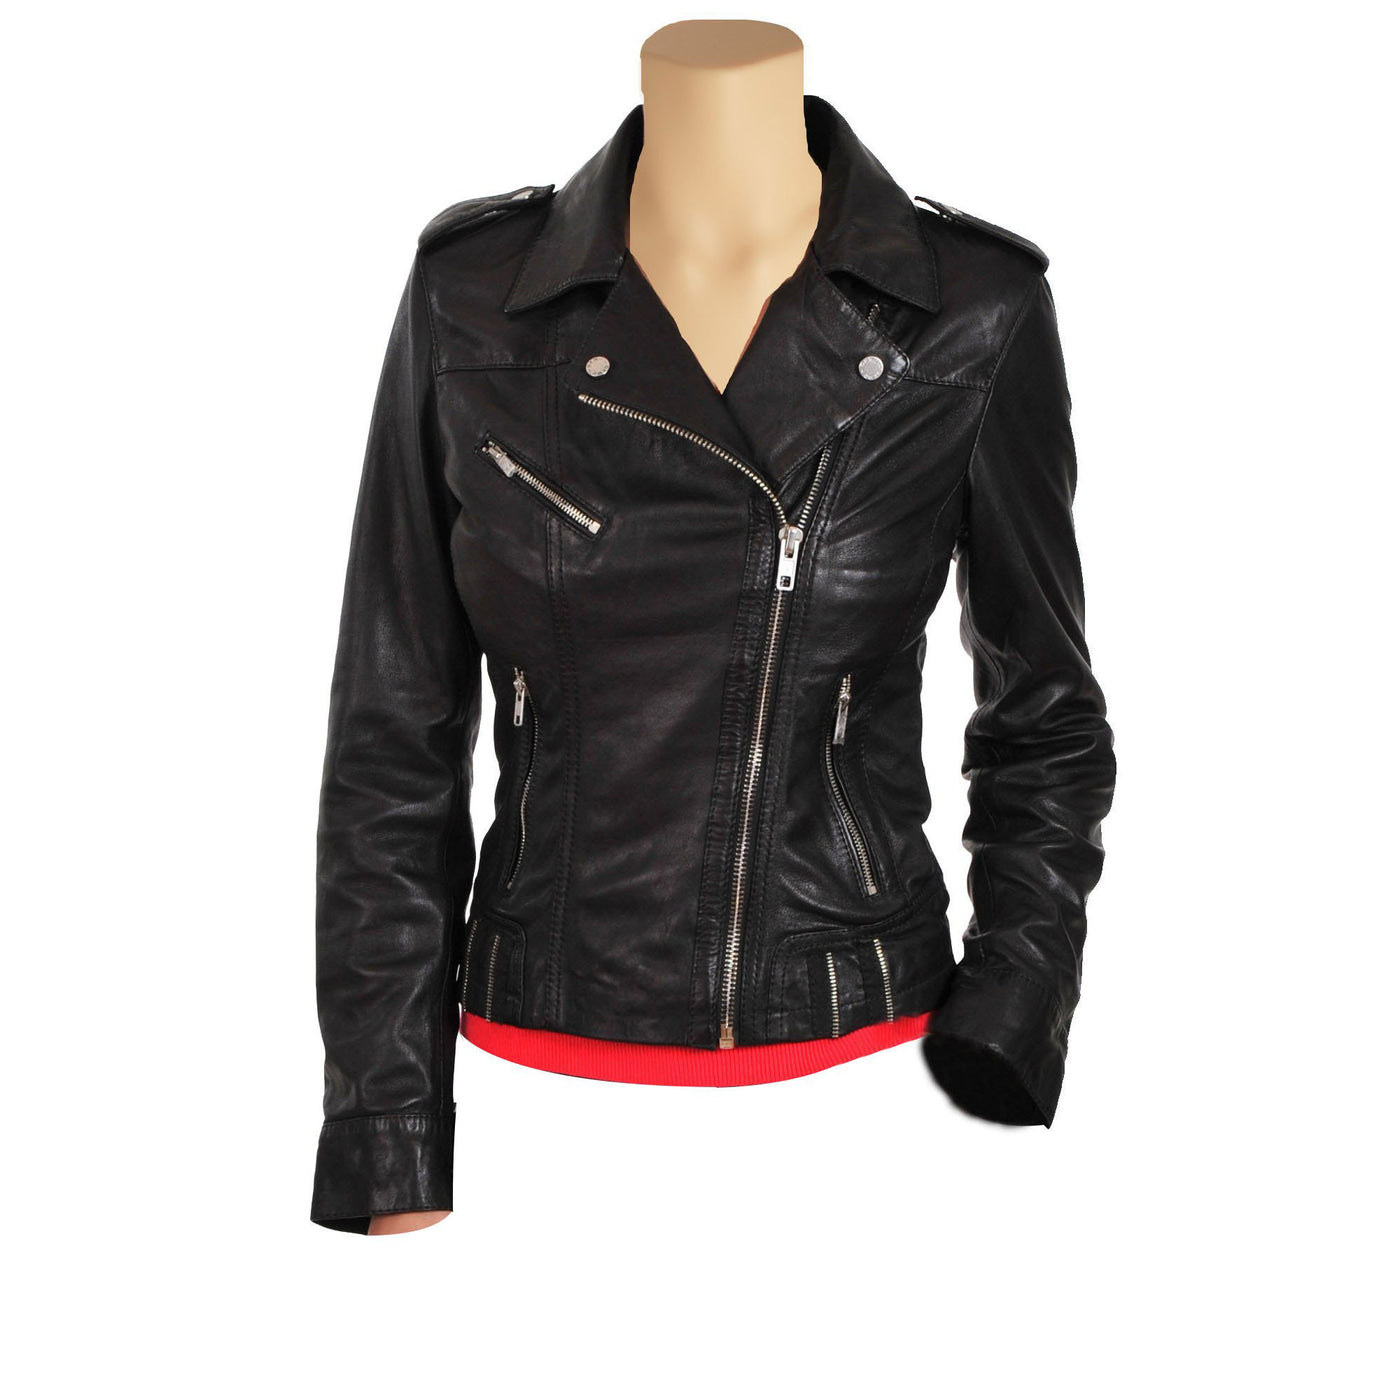 Women's classic biker style leather jacket - Lusso Leather - 1